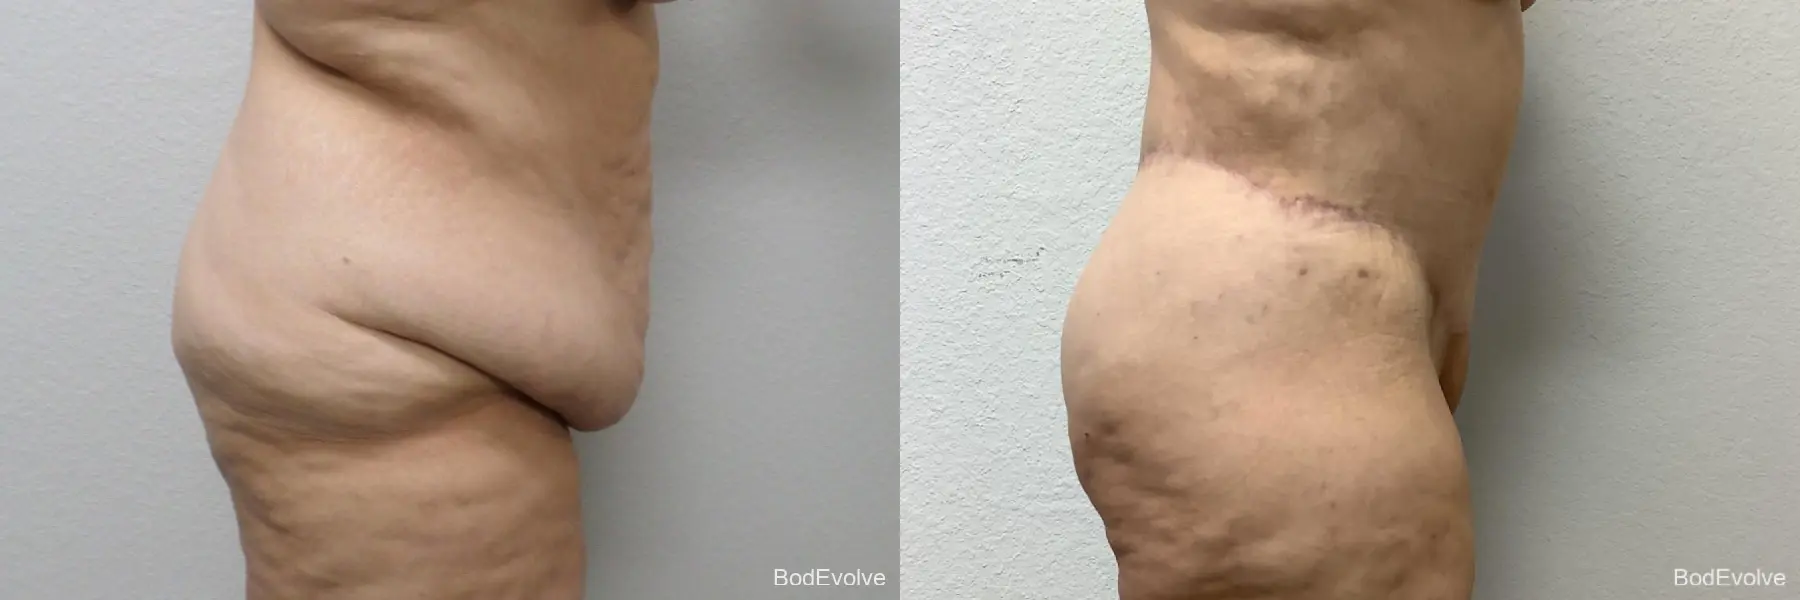 Body Lift: Patient 3 - Before and After 3